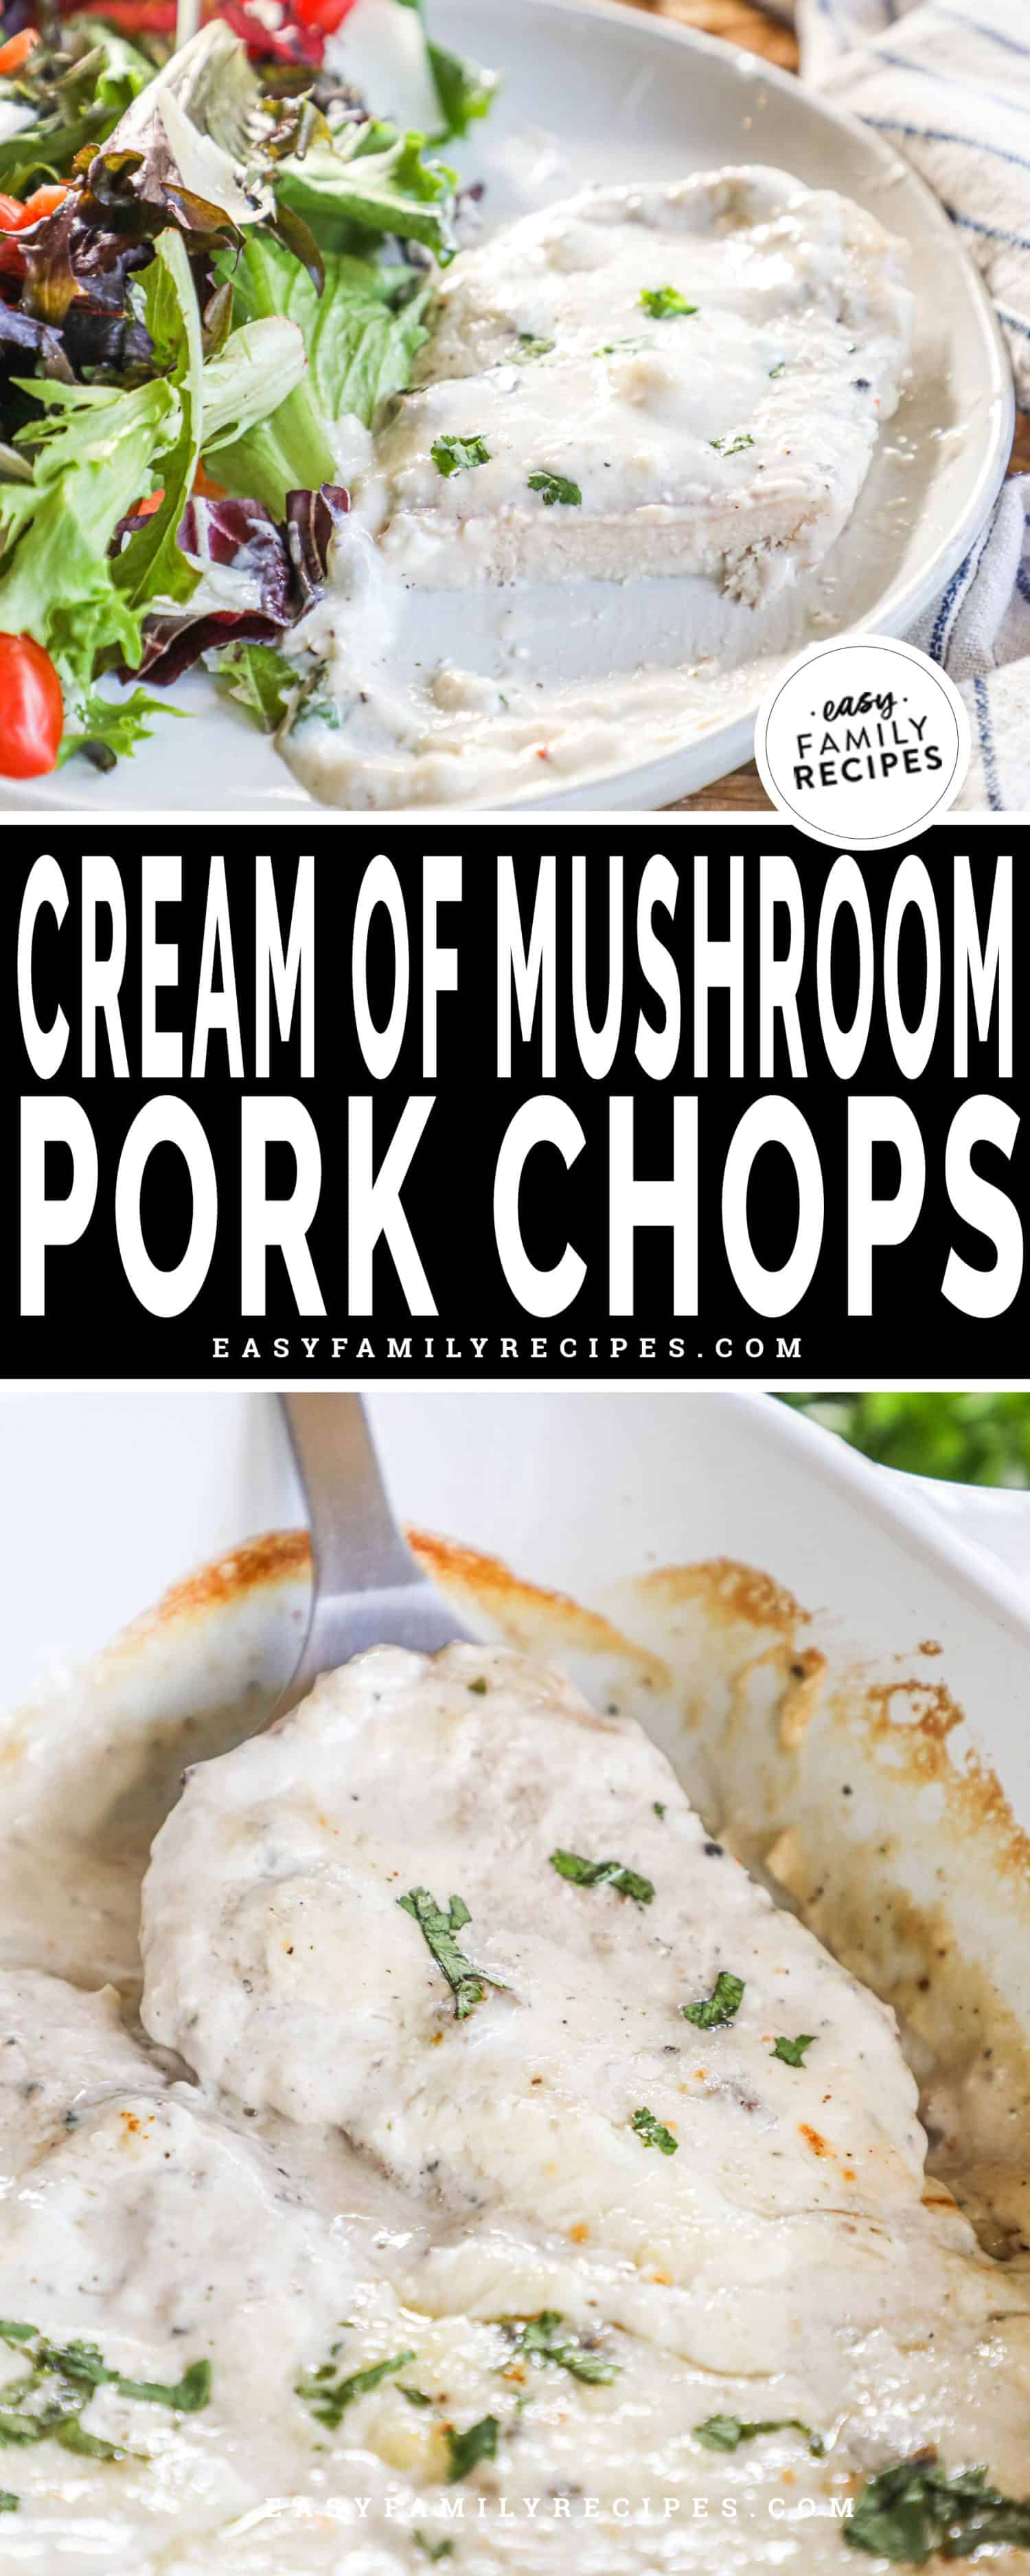 2 image collage showing a serving of cream of mushroom pork chops on a plate with a salad and also a spatula lifting a pork chop from the baking dish.